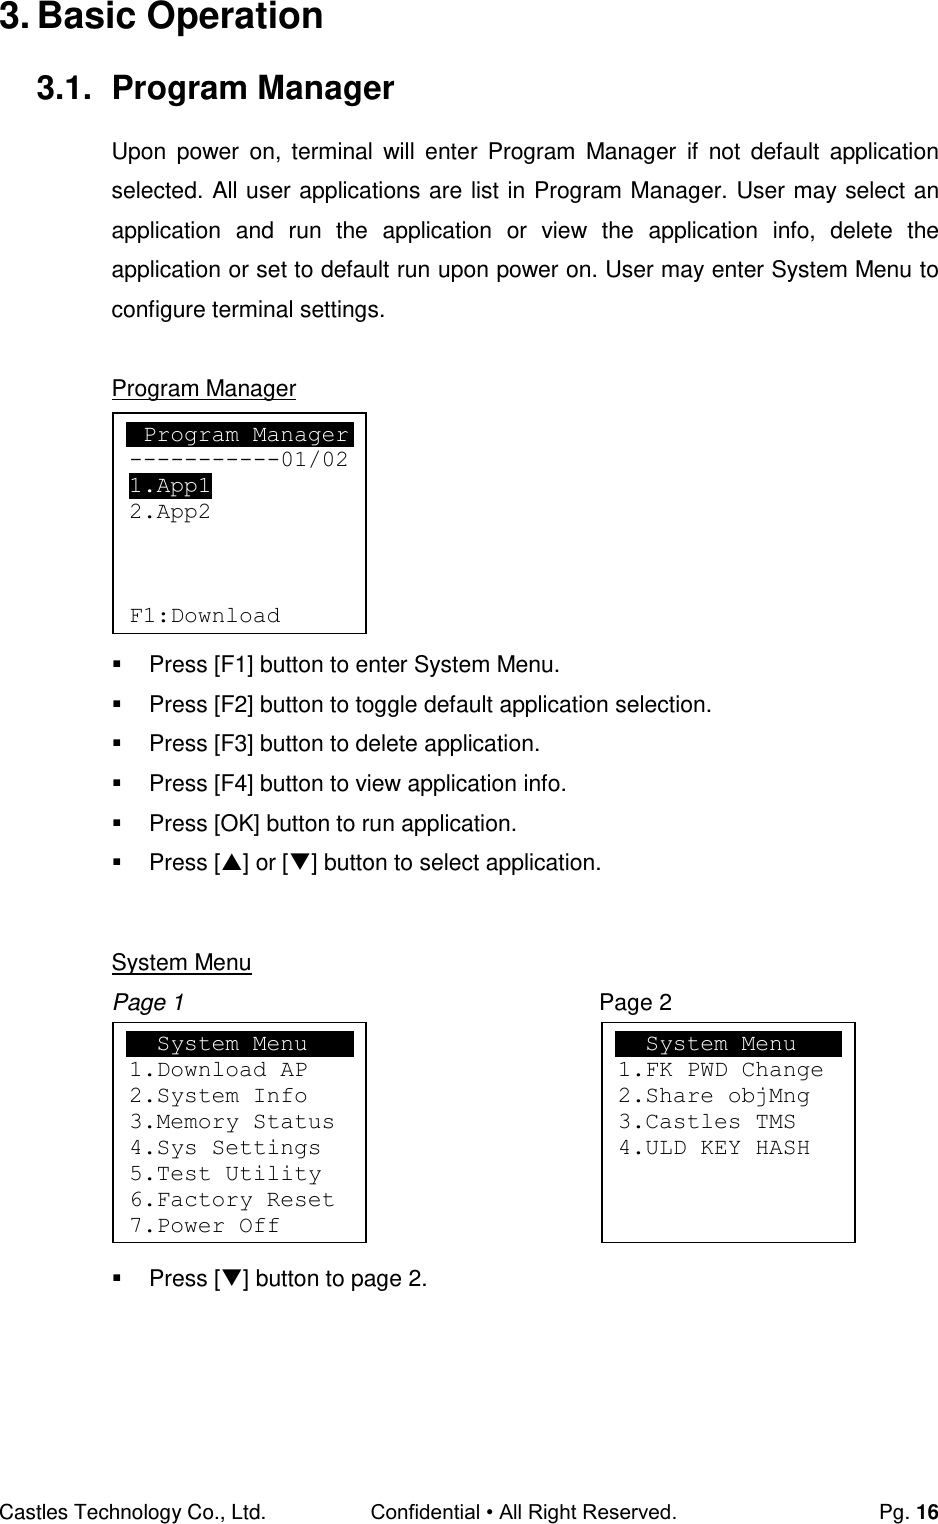 Castles Technology Co., Ltd. Confidential • All Right Reserved.  Pg. 16 3. Basic Operation 3.1.  Program Manager Upon  power  on,  terminal  will  enter  Program  Manager  if  not  default  application selected. All user applications are list in Program Manager. User may select an application  and  run  the  application  or  view  the  application  info,  delete  the application or set to default run upon power on. User may enter System Menu to configure terminal settings.  Program Manager         Press [F1] button to enter System Menu.   Press [F2] button to toggle default application selection.   Press [F3] button to delete application.   Press [F4] button to view application info.   Press [OK] button to run application.   Press [] or [] button to select application.   System Menu Page 1  Page 2         Press [] button to page 2.     Program Manager -----------01/02 1.App1 2.App2    F1:Download   System Menu 1.Download AP 2.System Info 3.Memory Status 4.Sys Settings 5.Test Utility 6.Factory Reset 7.Power Off     System Menu 1.FK PWD Change 2.Share objMng 3.Castles TMS 4.ULD KEY HASH  